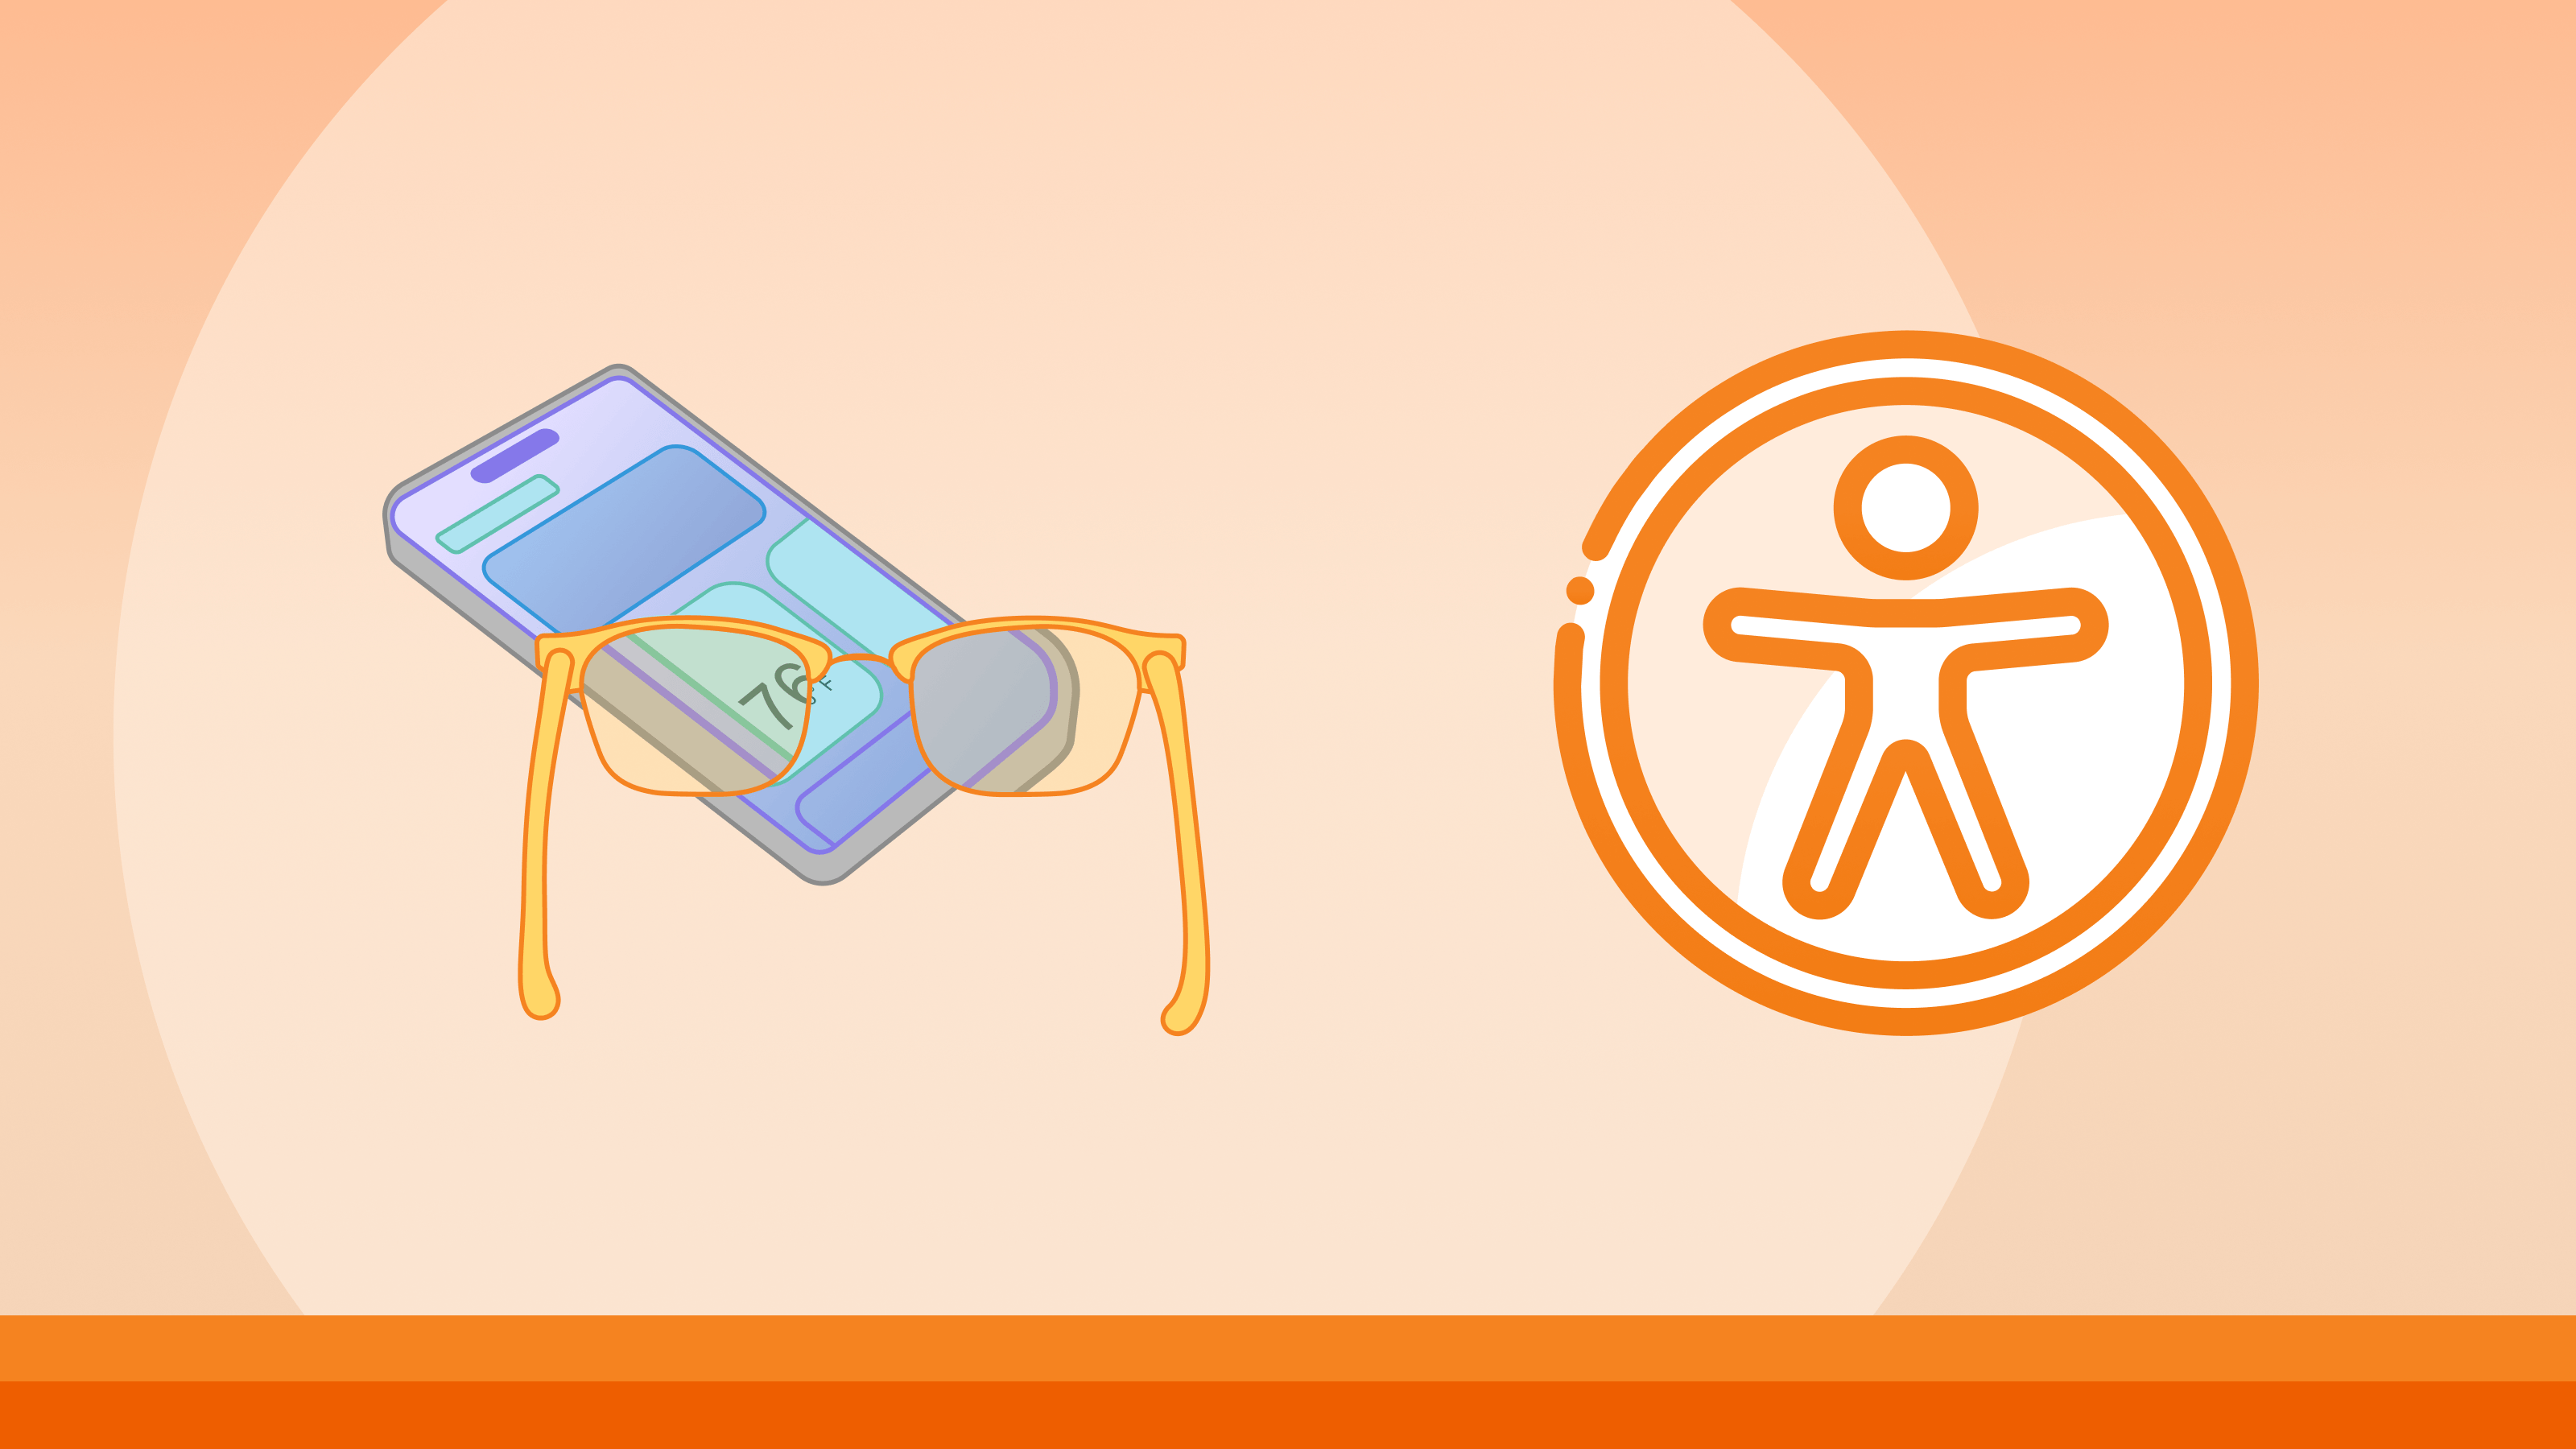 illustration of the accessibility icon and a smartphone screen seen through glasses